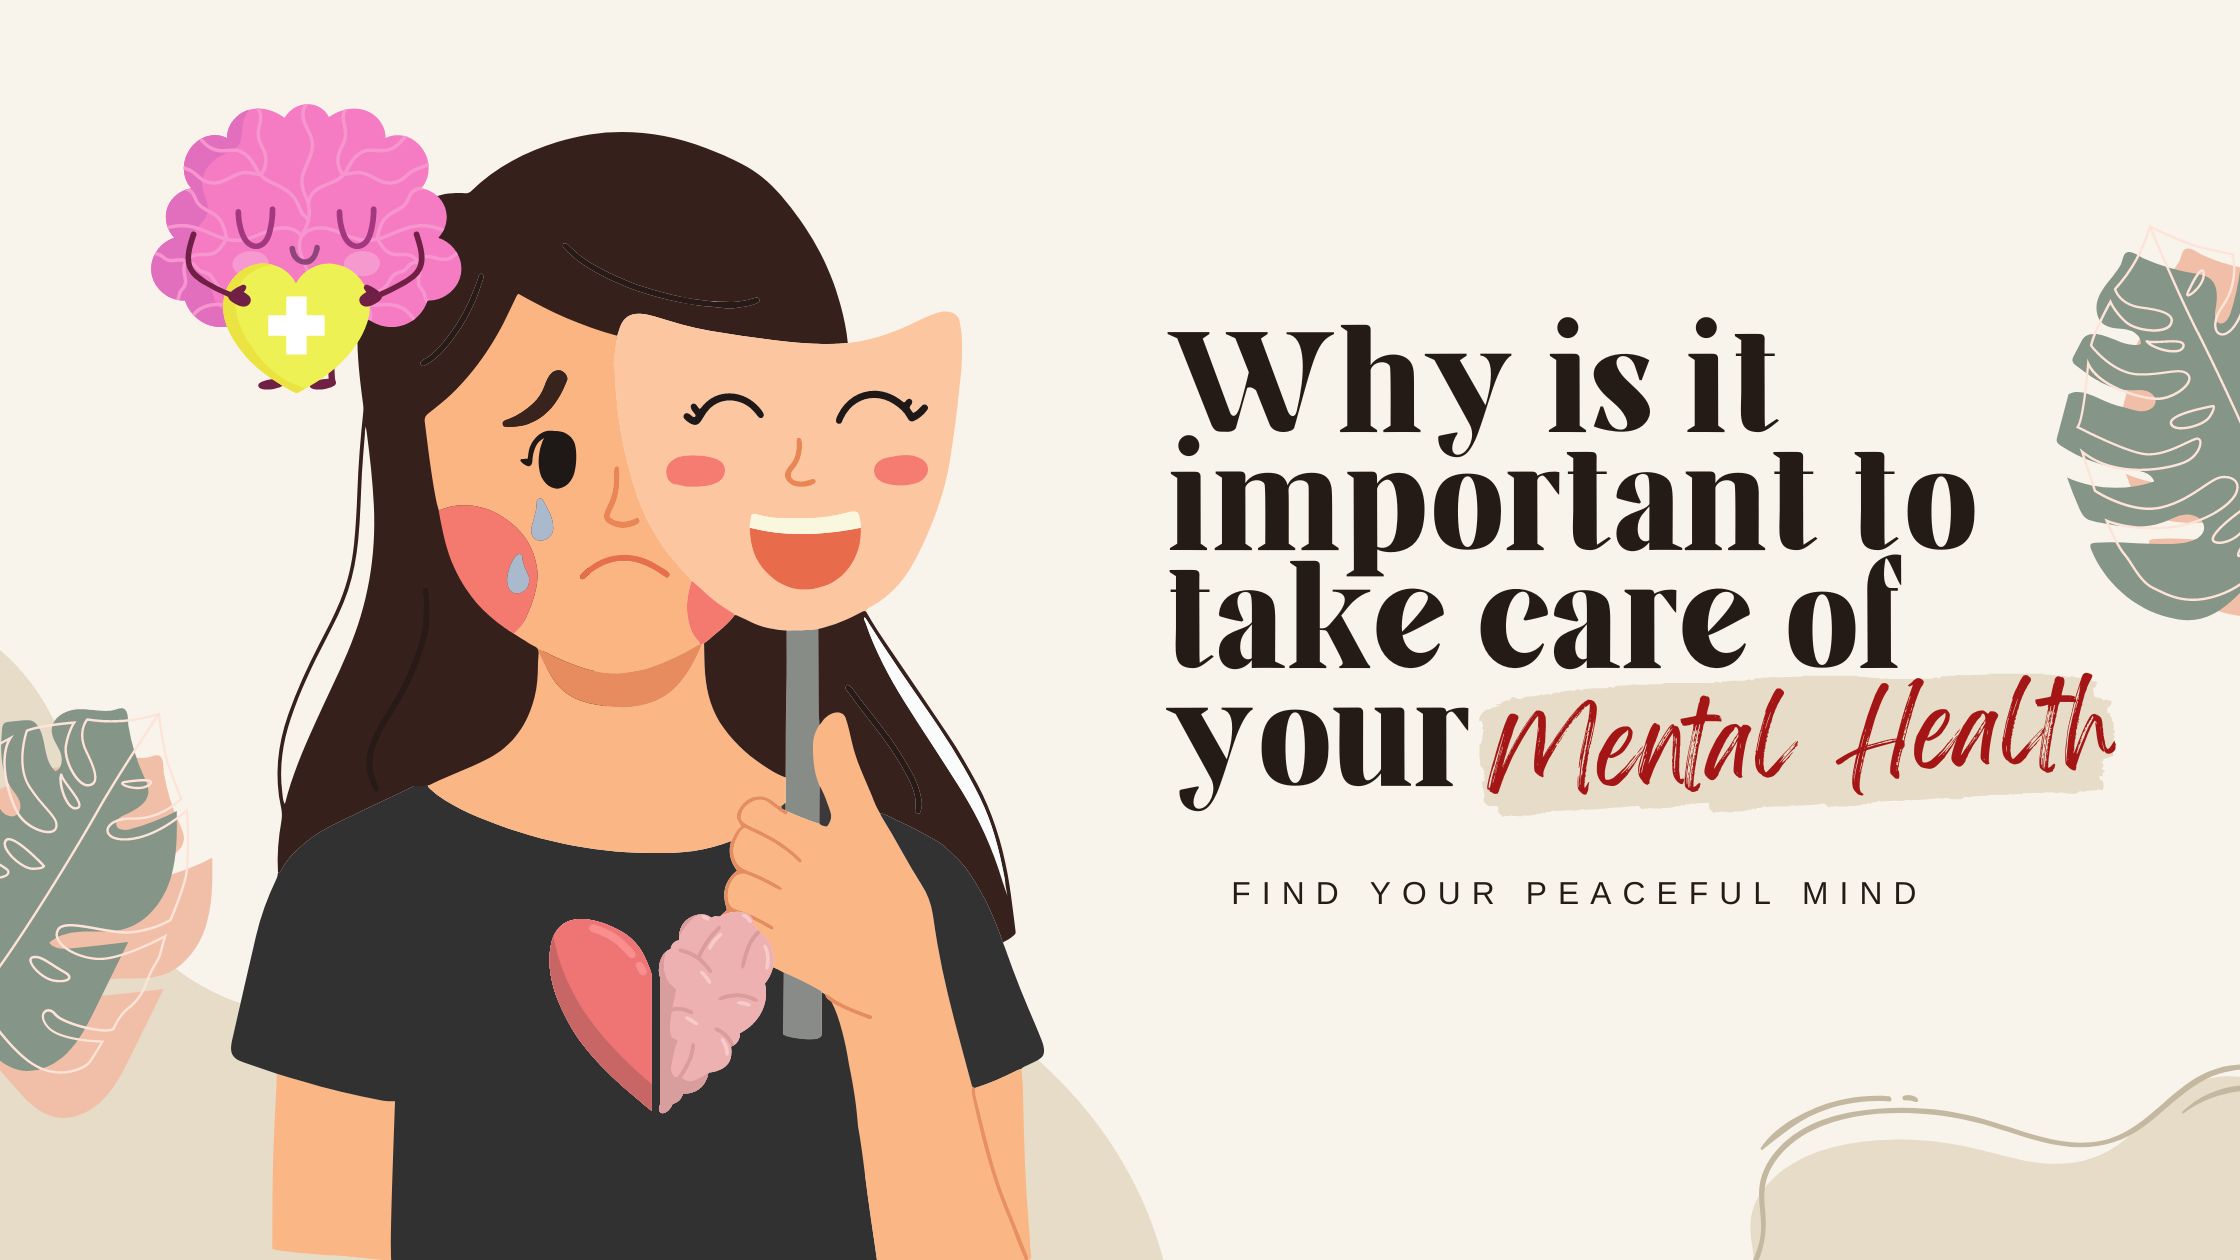 Why is it important to take care of your mental health